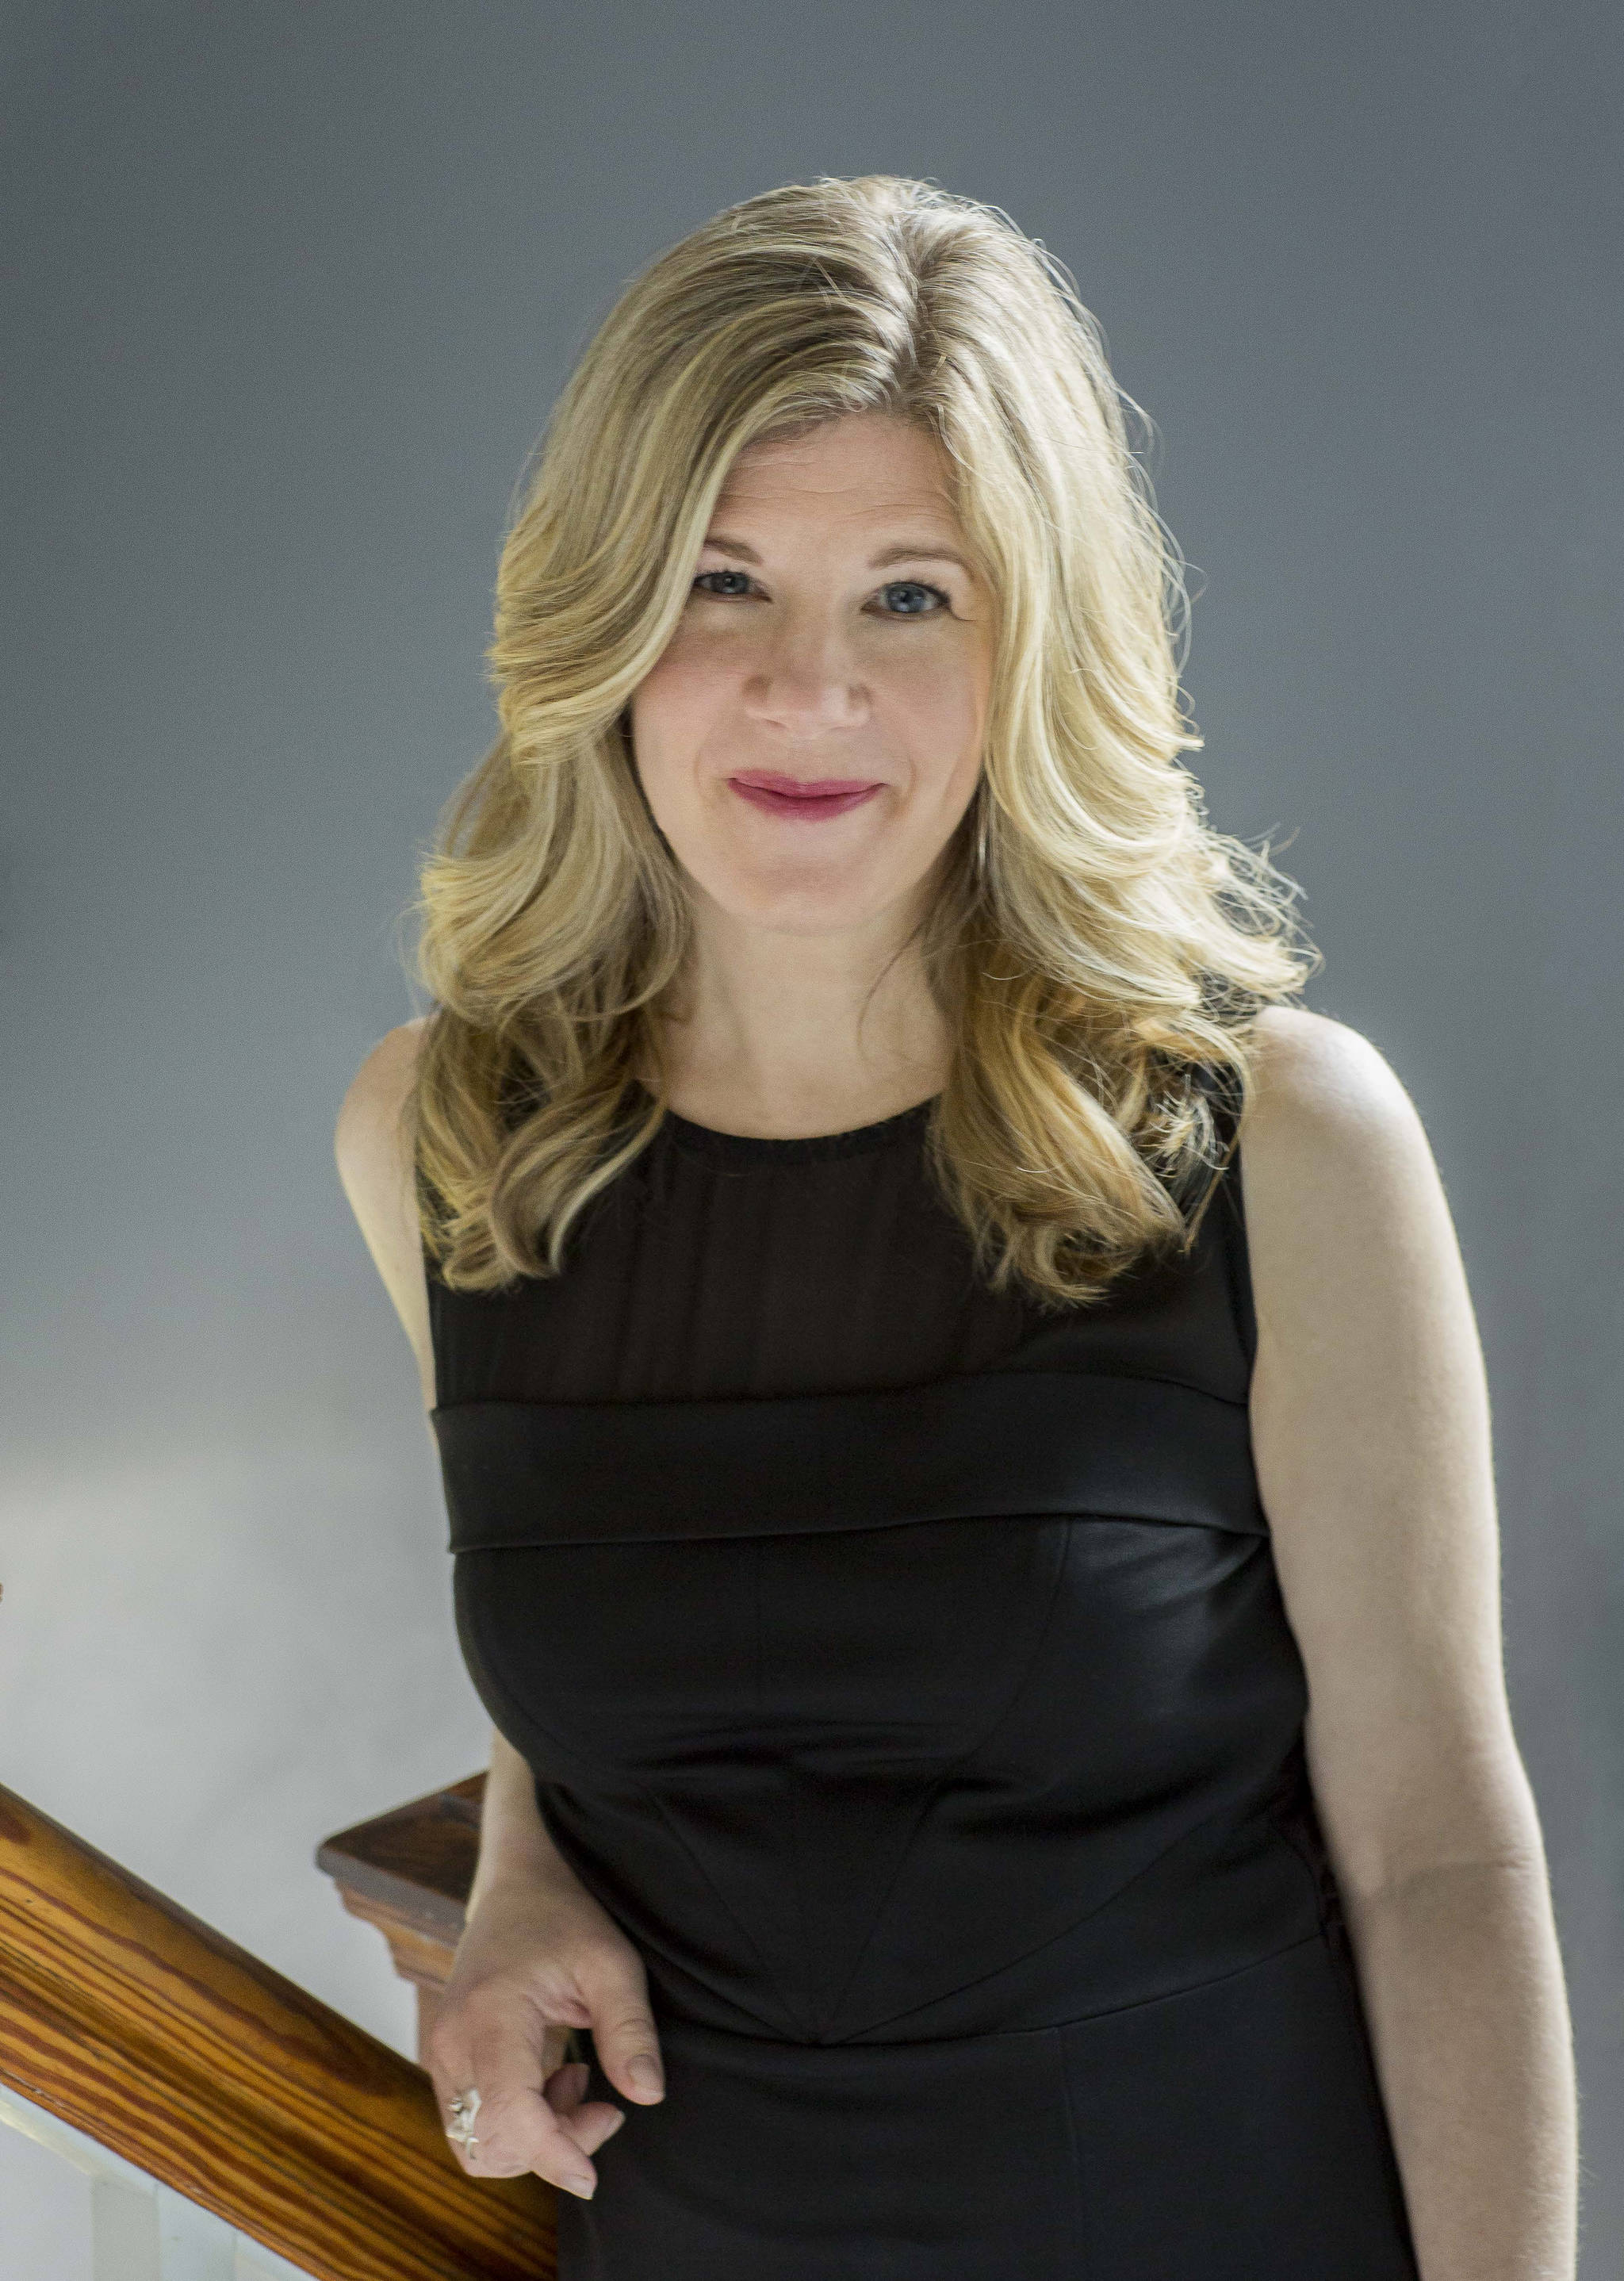 Dar Williams, author of “What I Found in a Thousand Towns” (Basic Books, September 2017, $27)